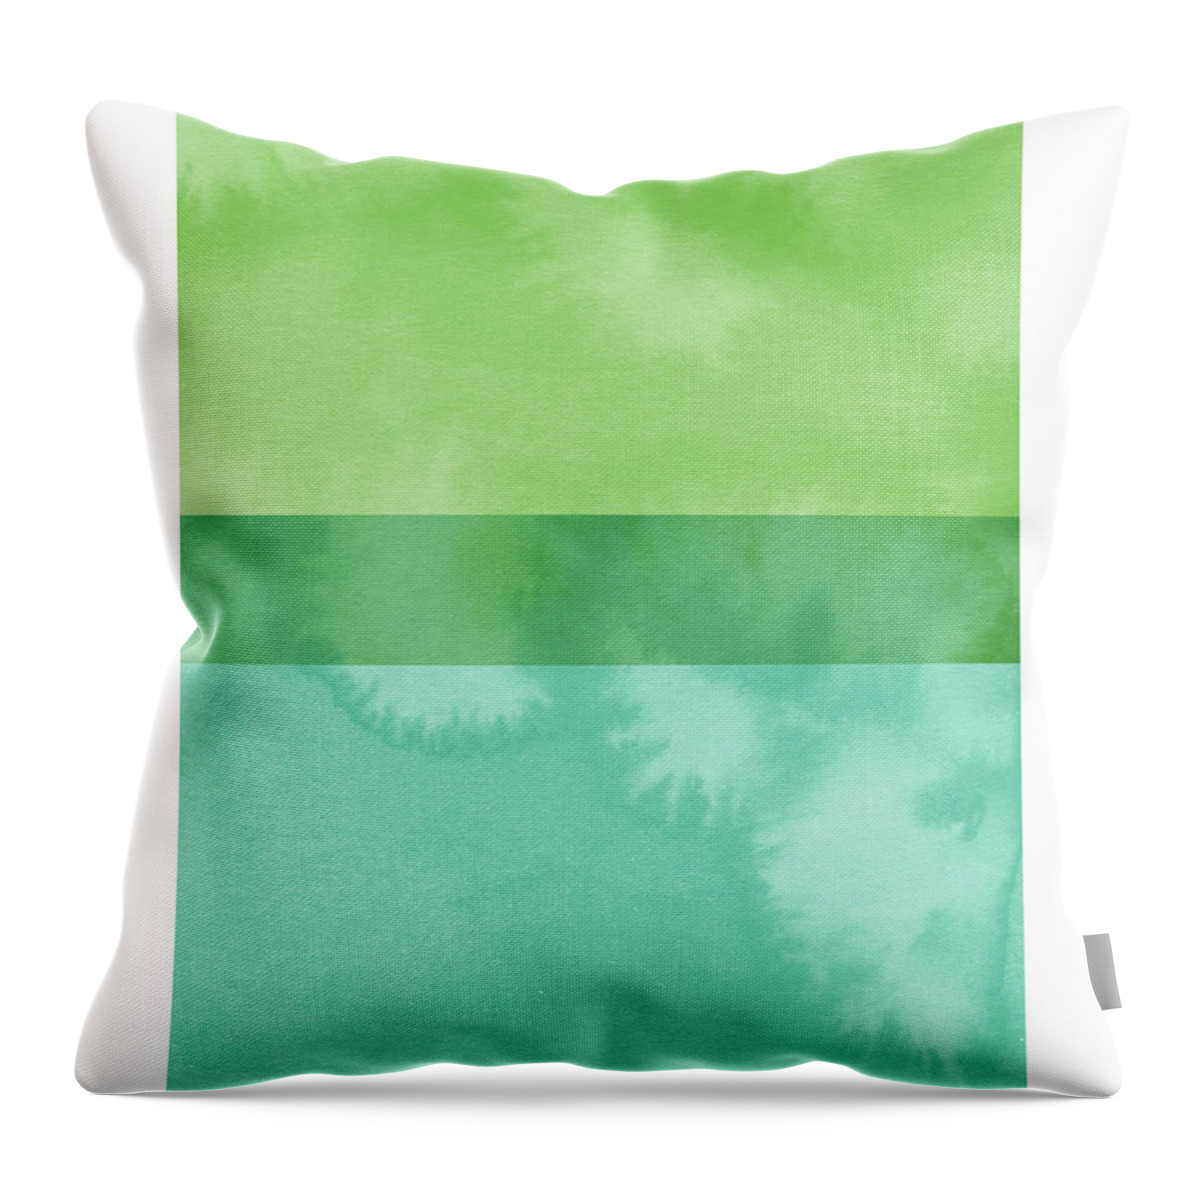 Modern Throw Pillow featuring the painting Light Breeze 2- Art by Linda Woods by Linda Woods